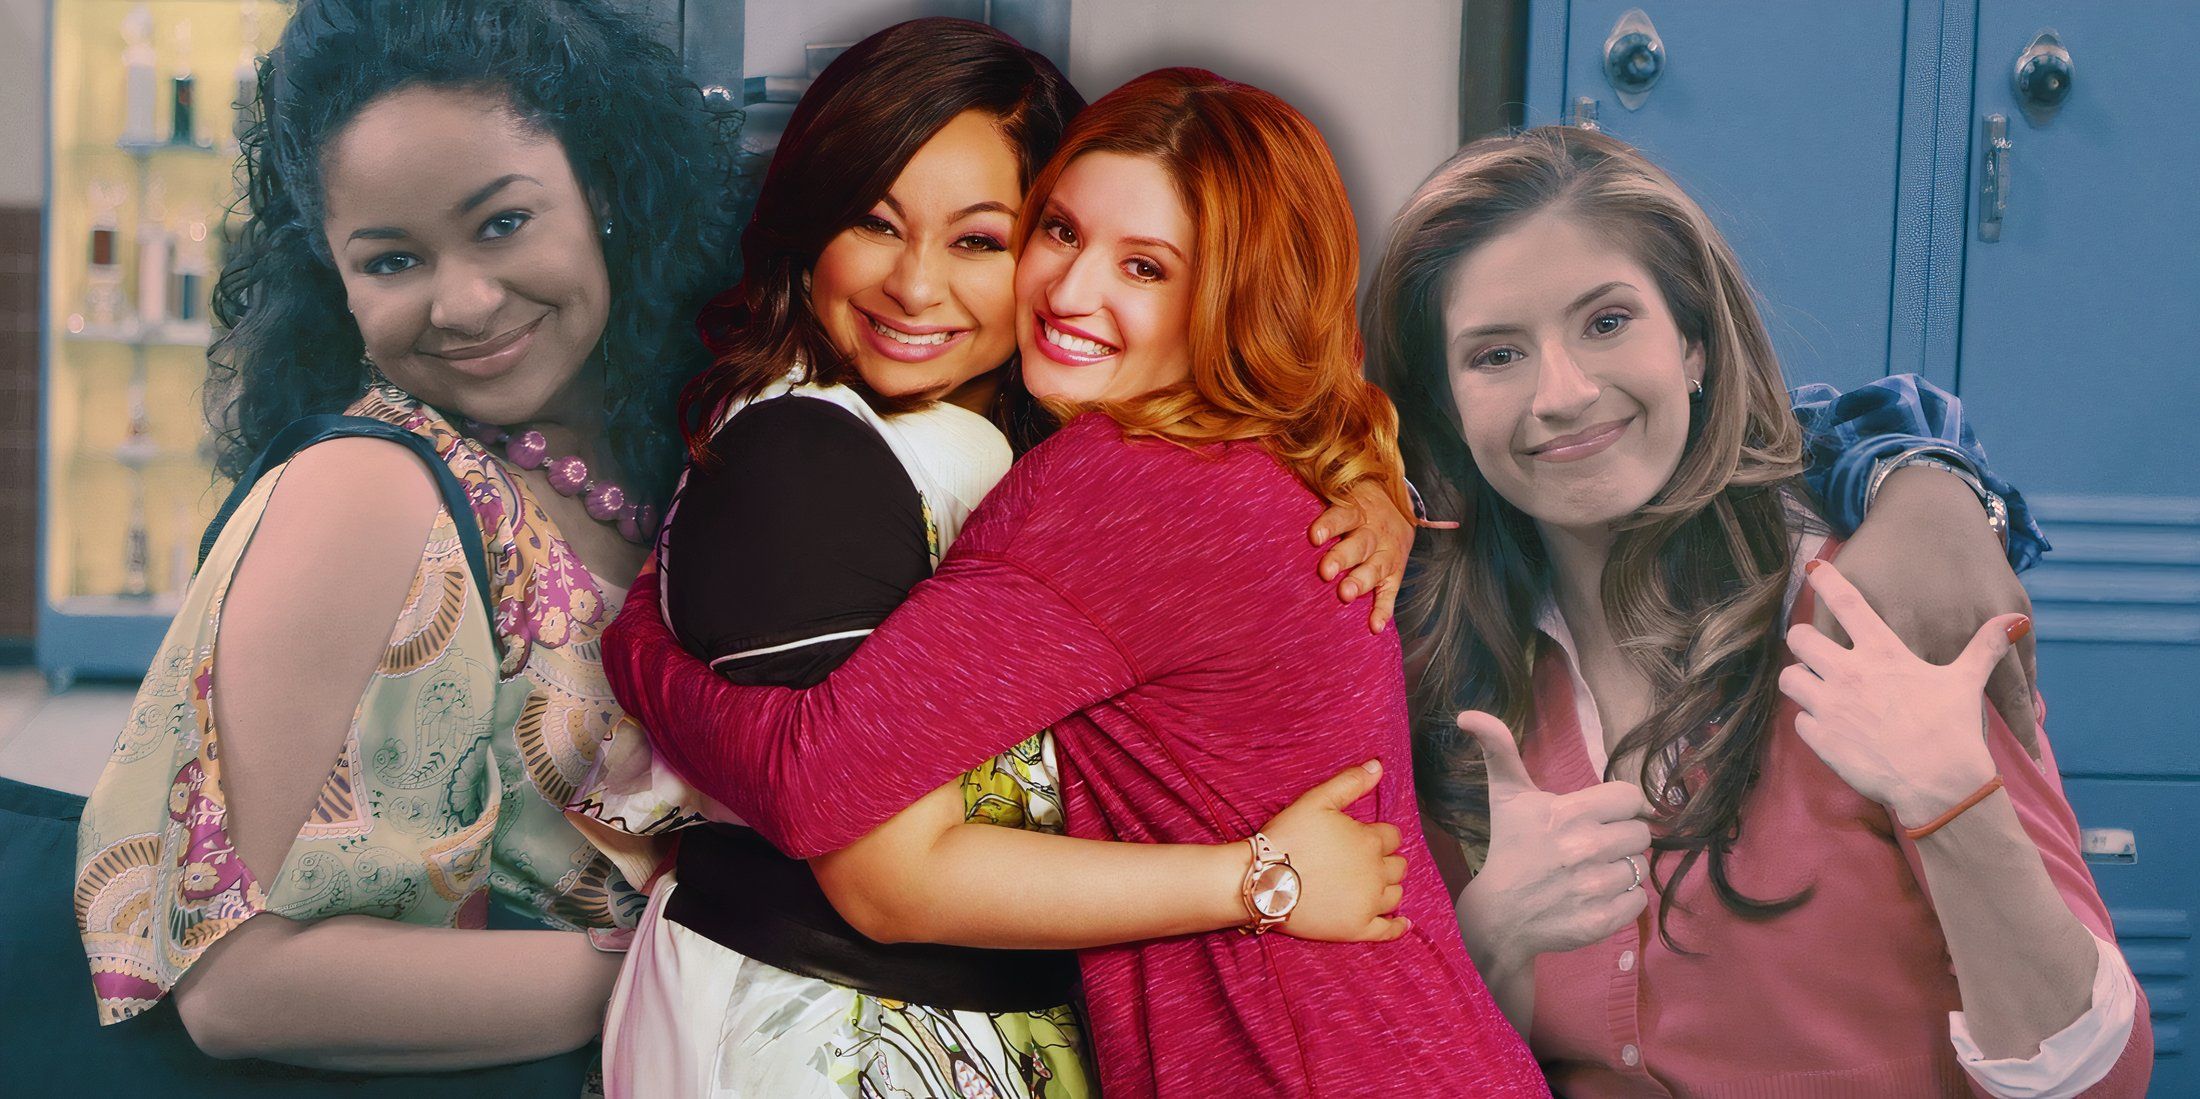 An image of Raven and Chelsea hugging in Raven's Home over an image of them from That's So Raven